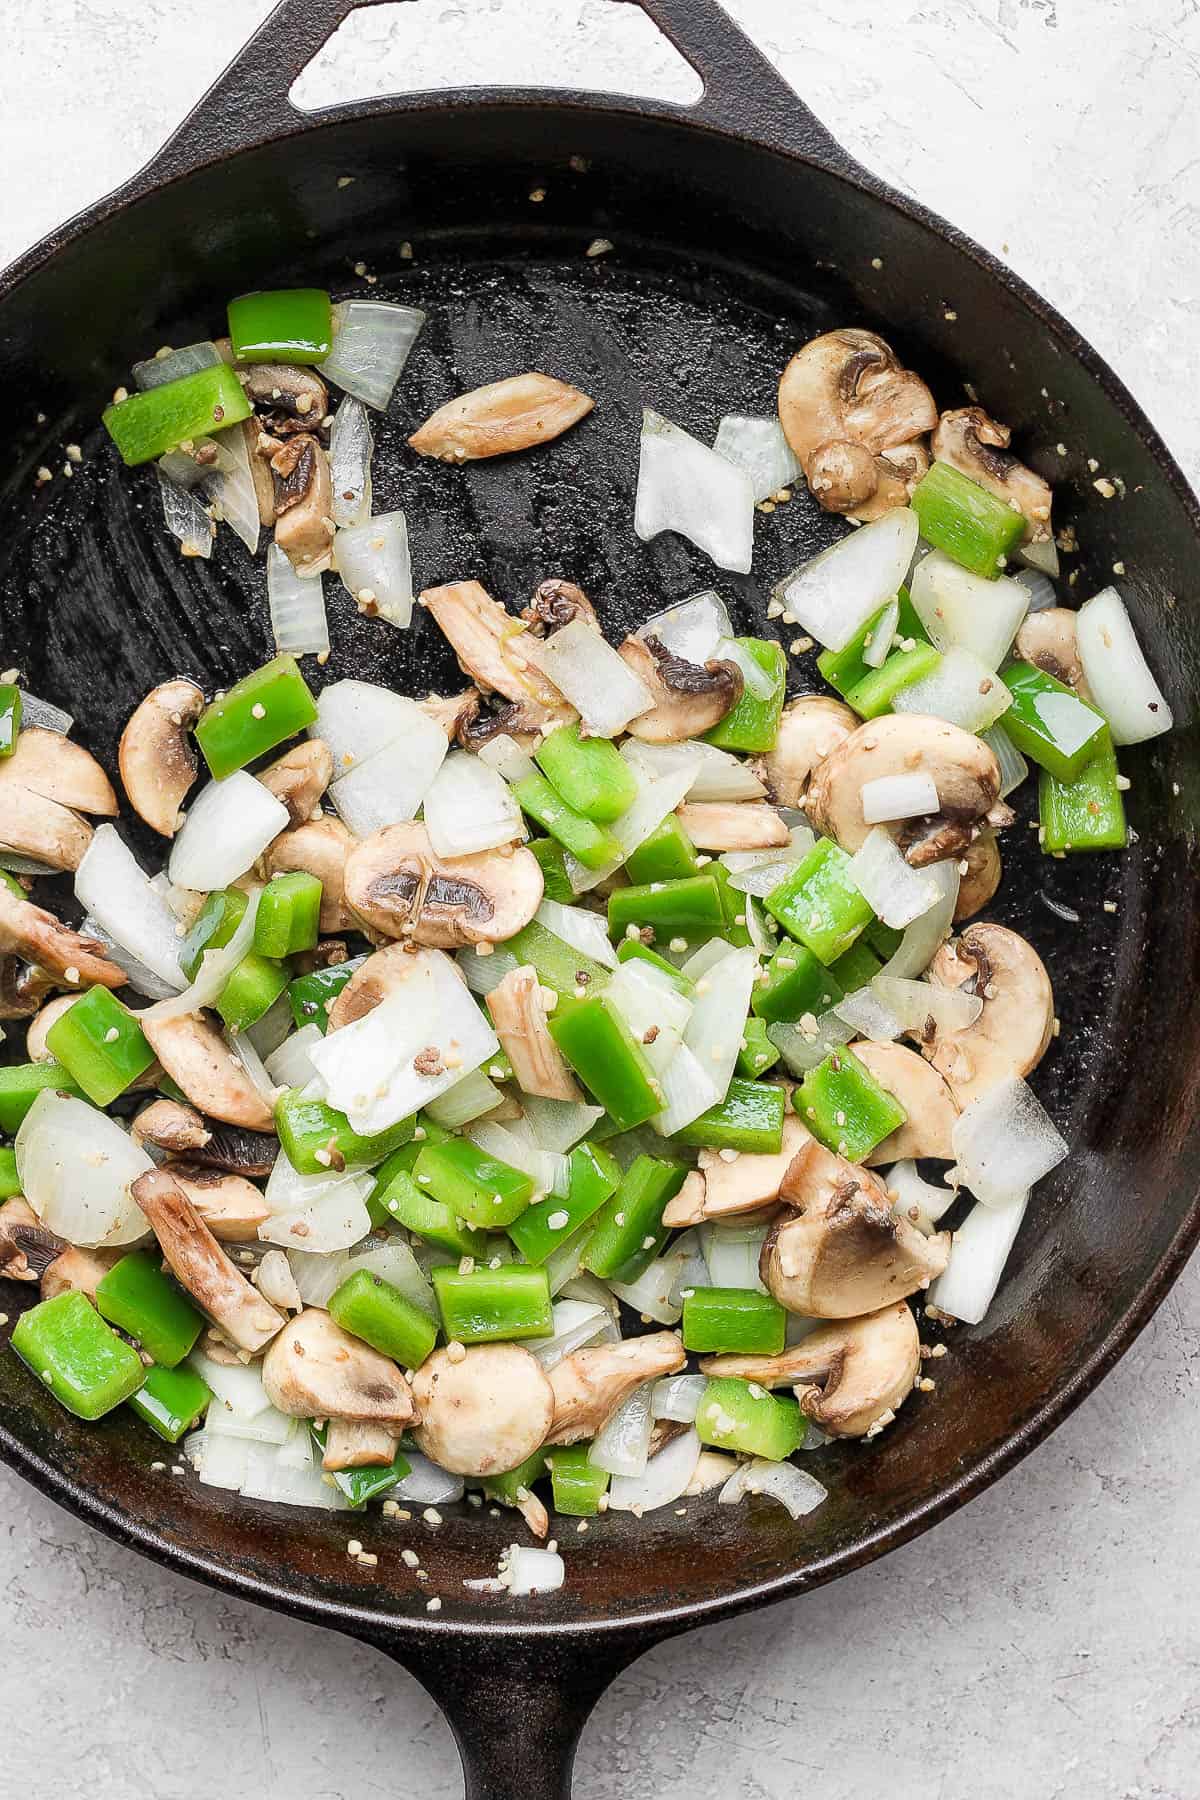 Mushrooms added to the skillet.